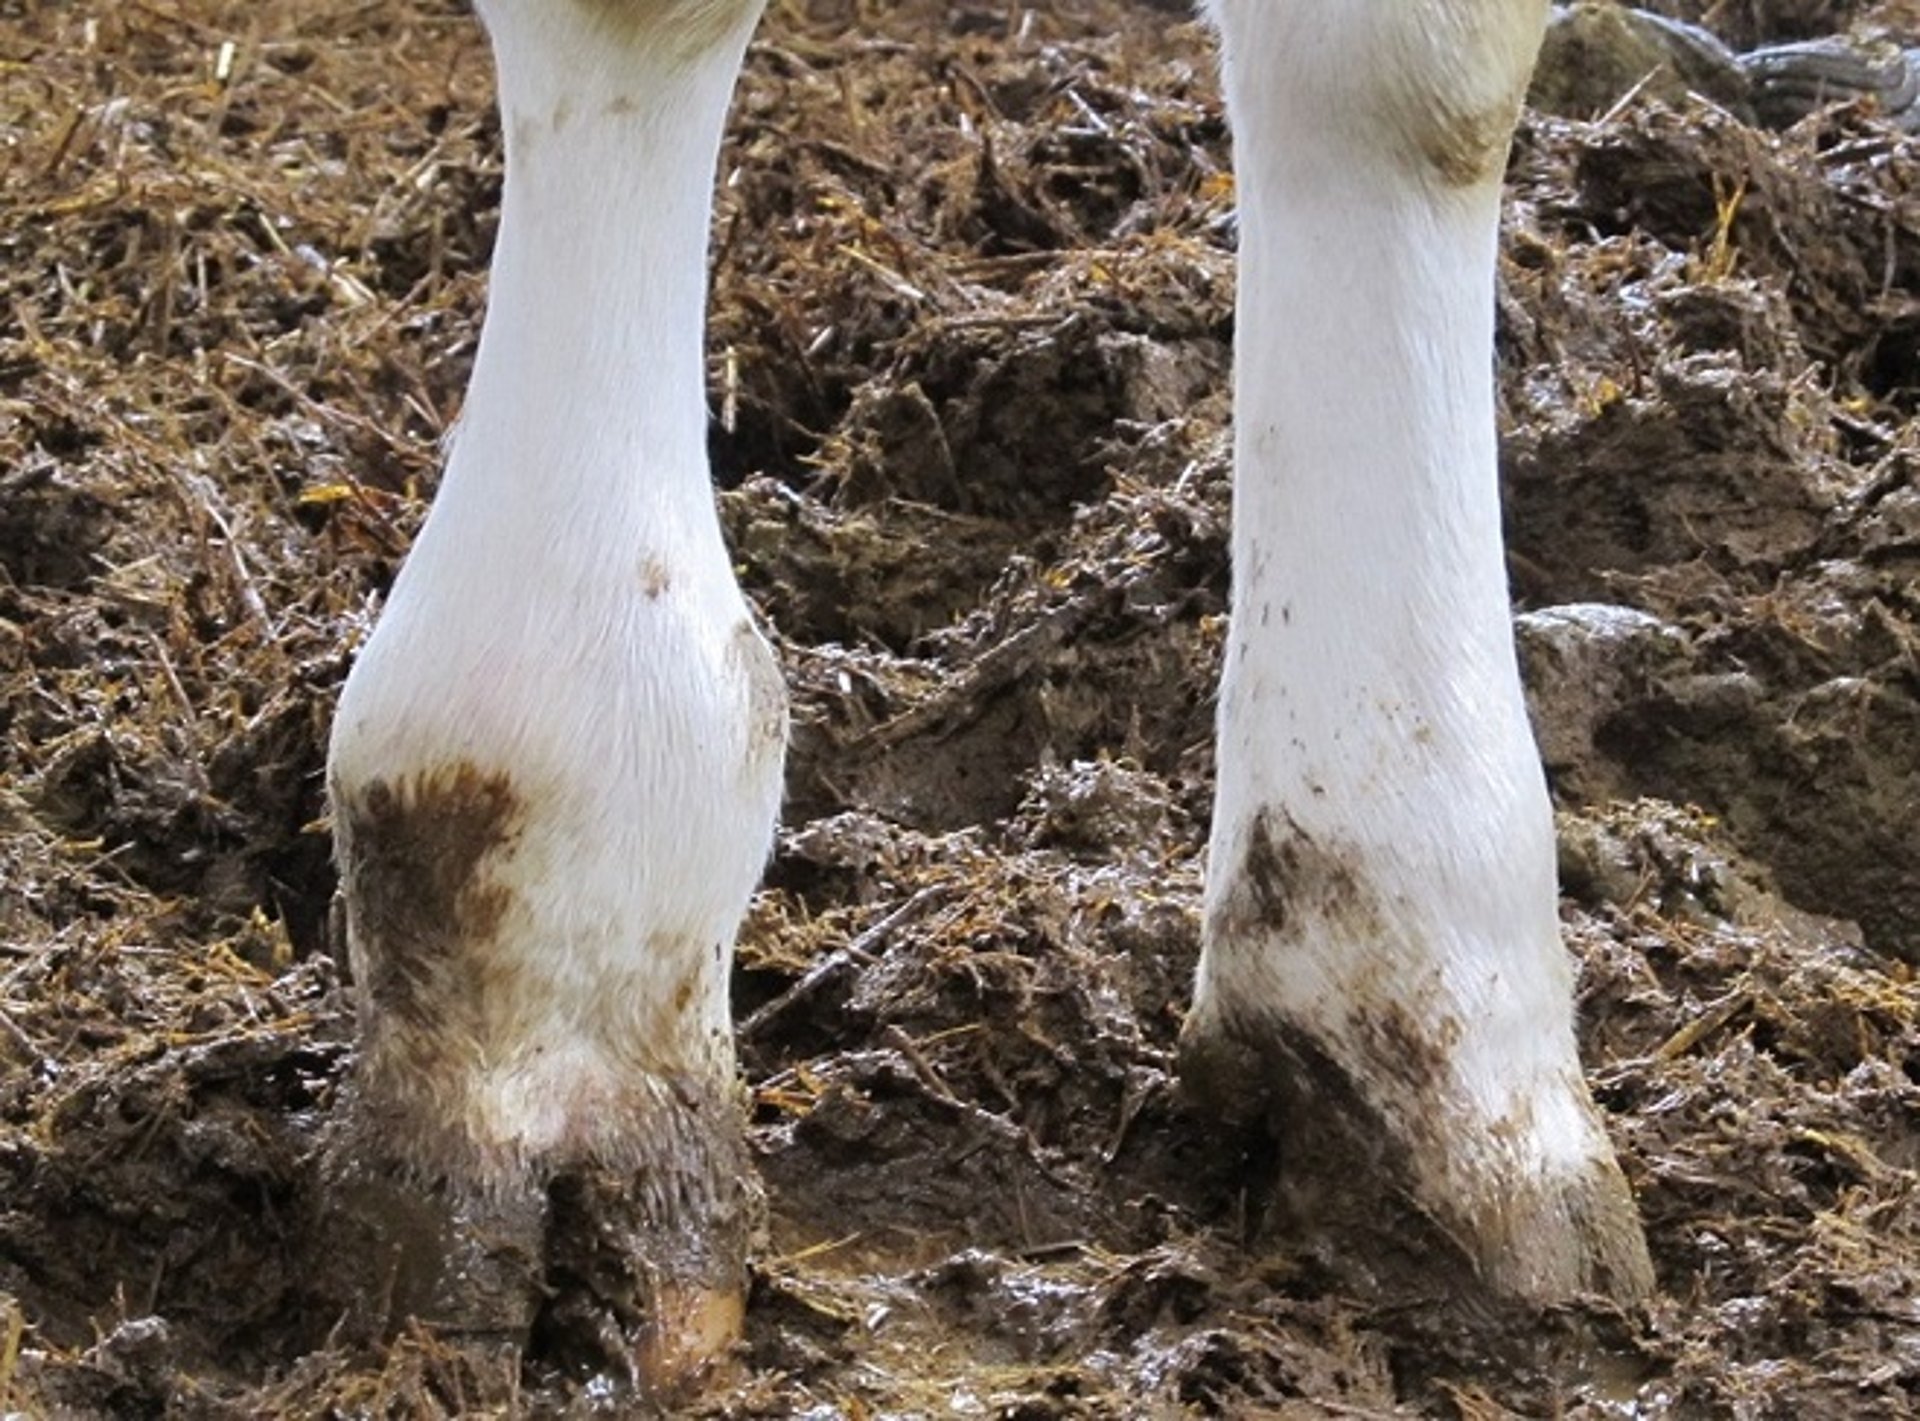 Joint disease, cow